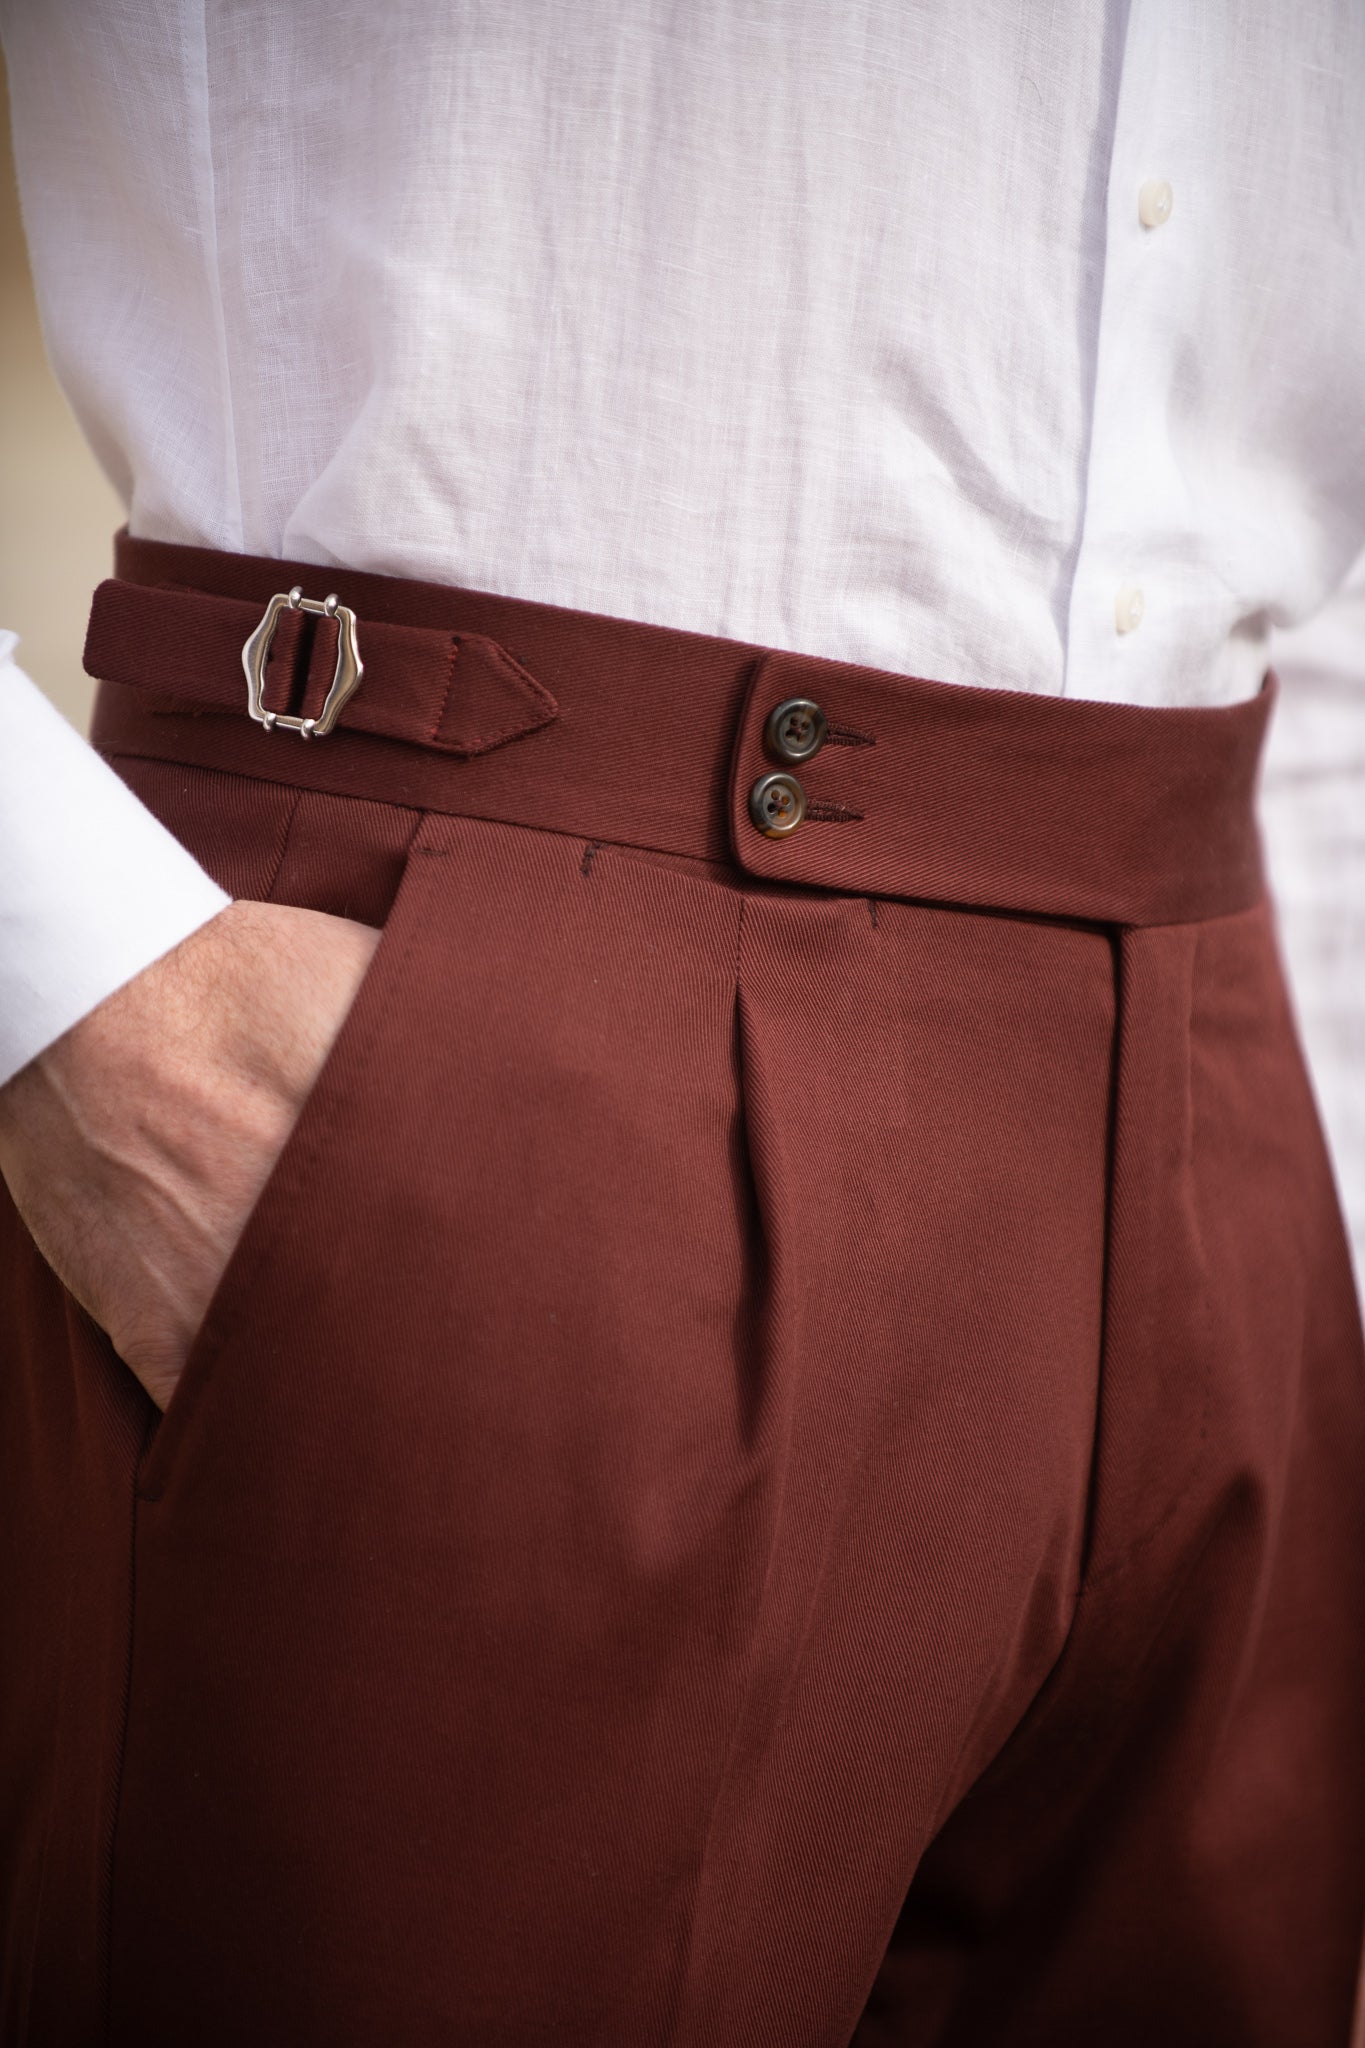 Bordeaux cotton trousers  "Soragna Capsule Collection" - Made in Italy